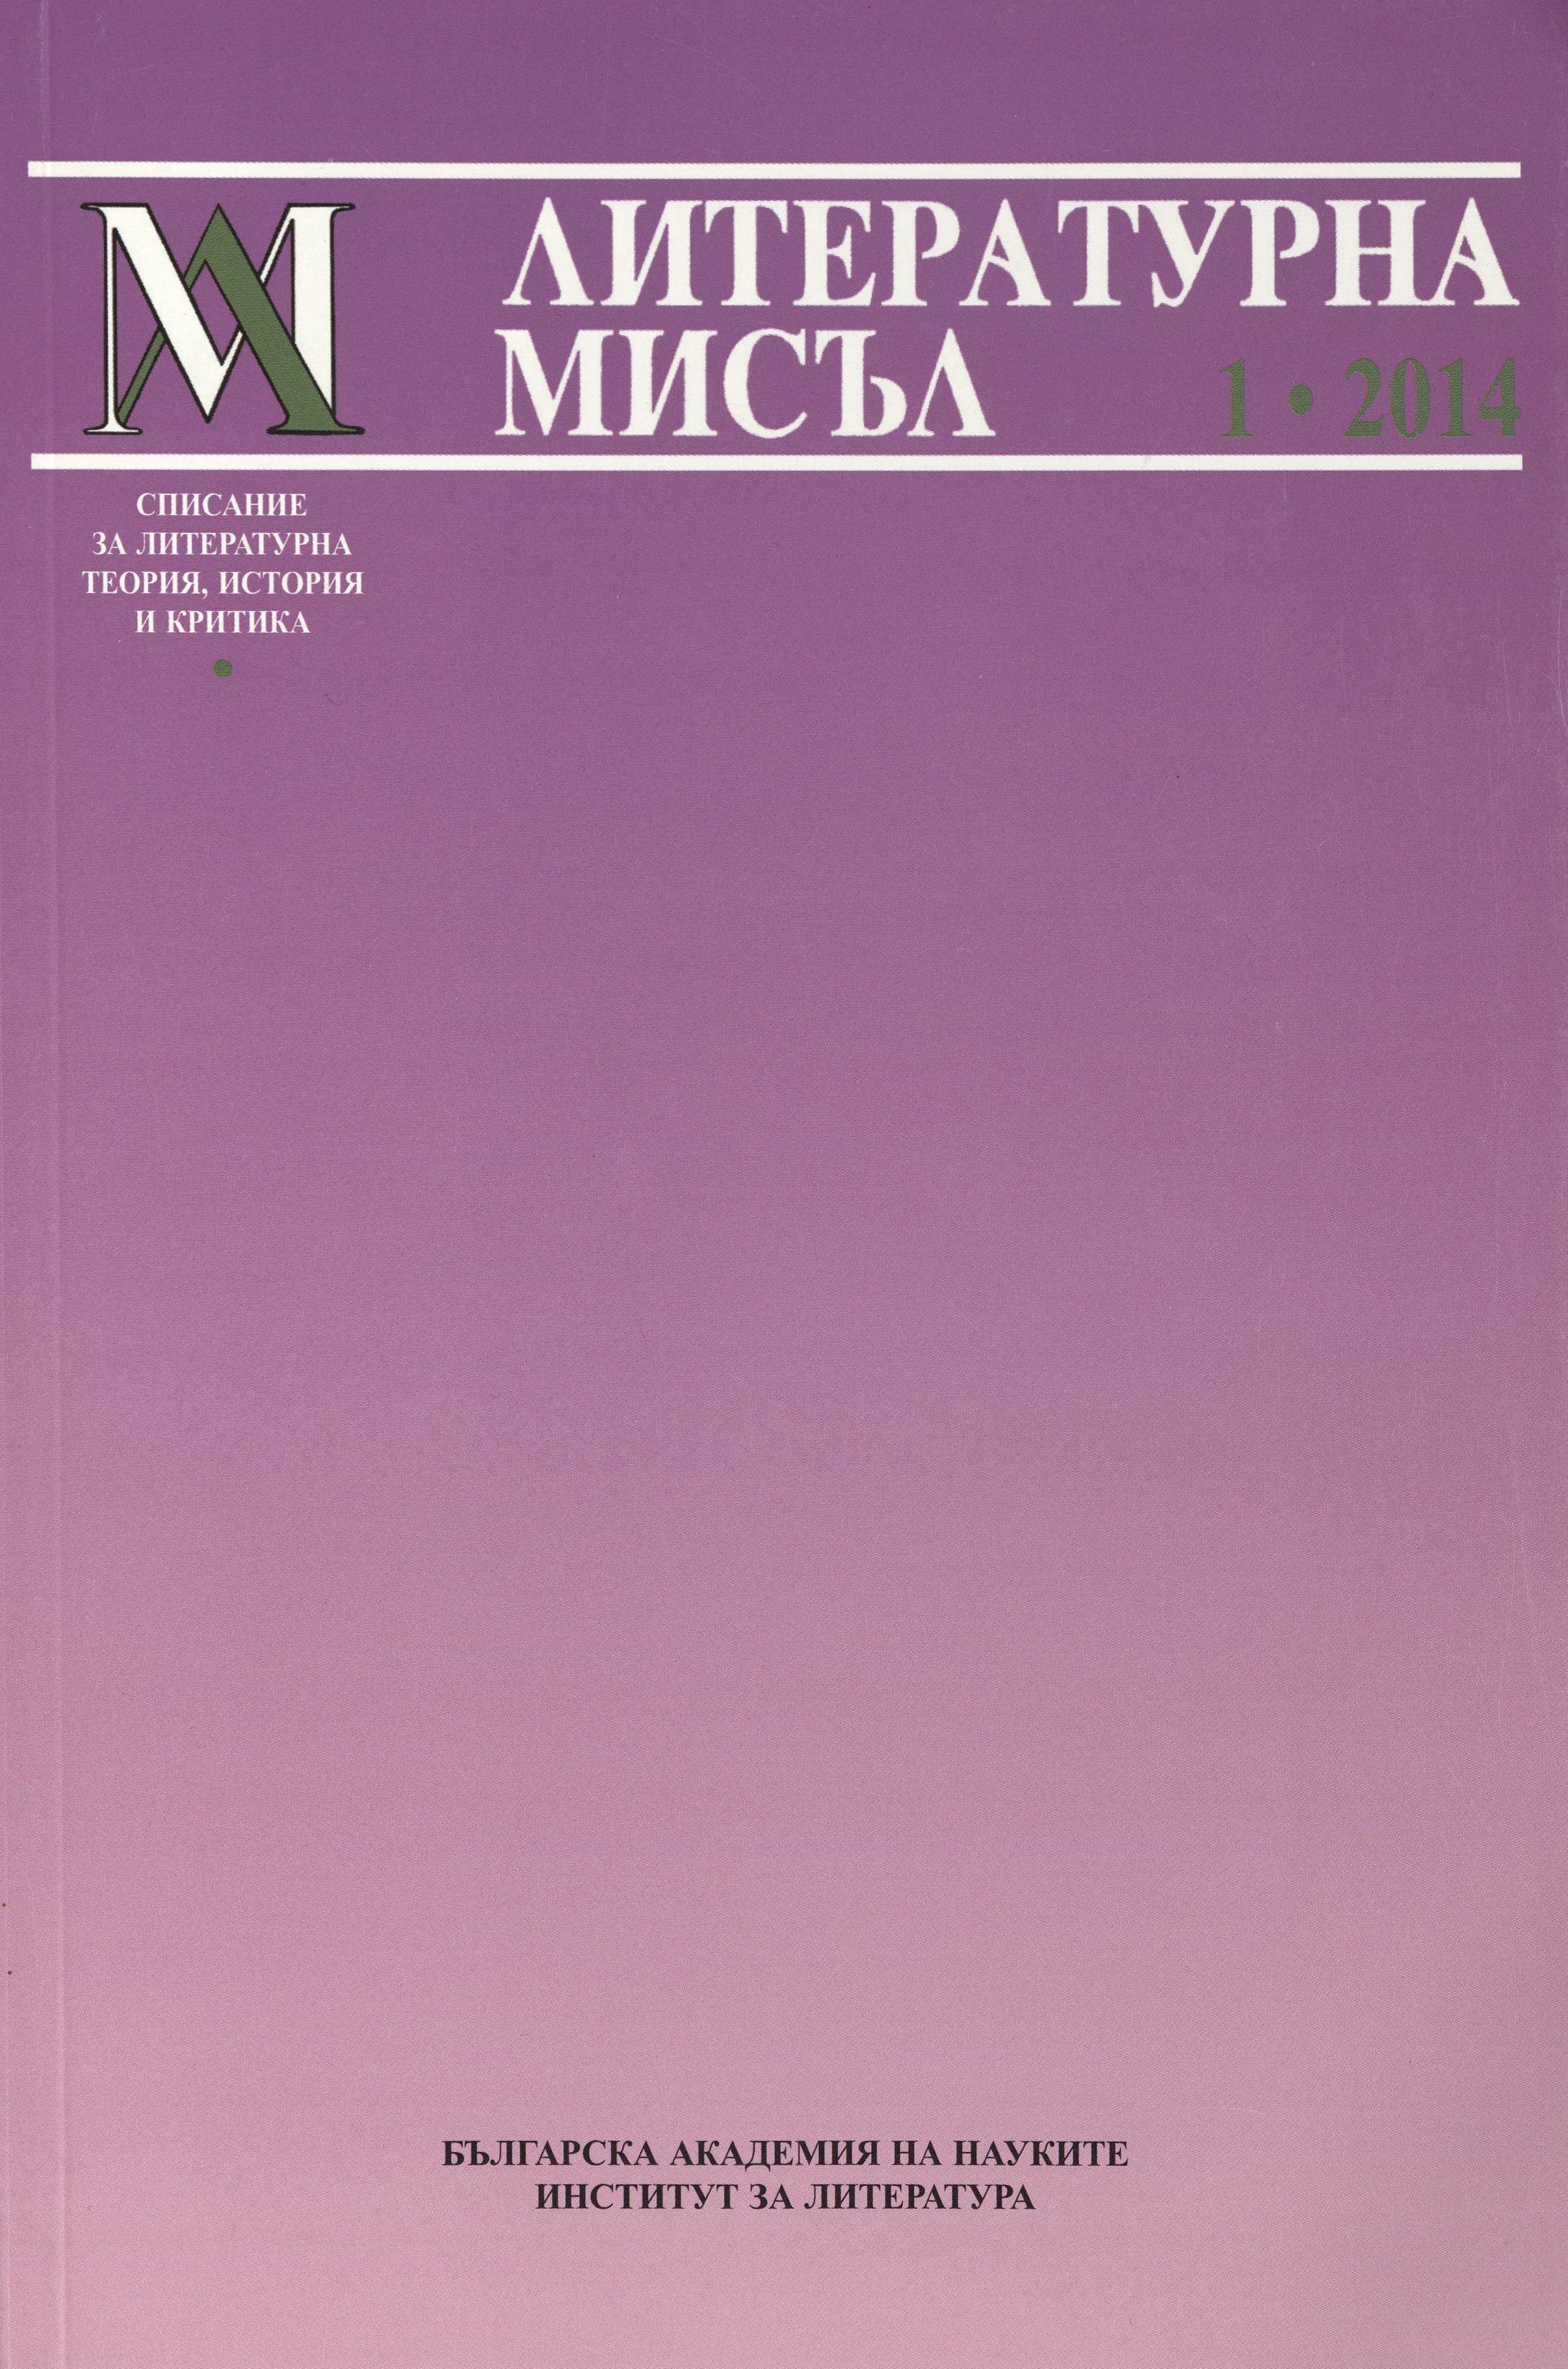 Issue 1, 2014